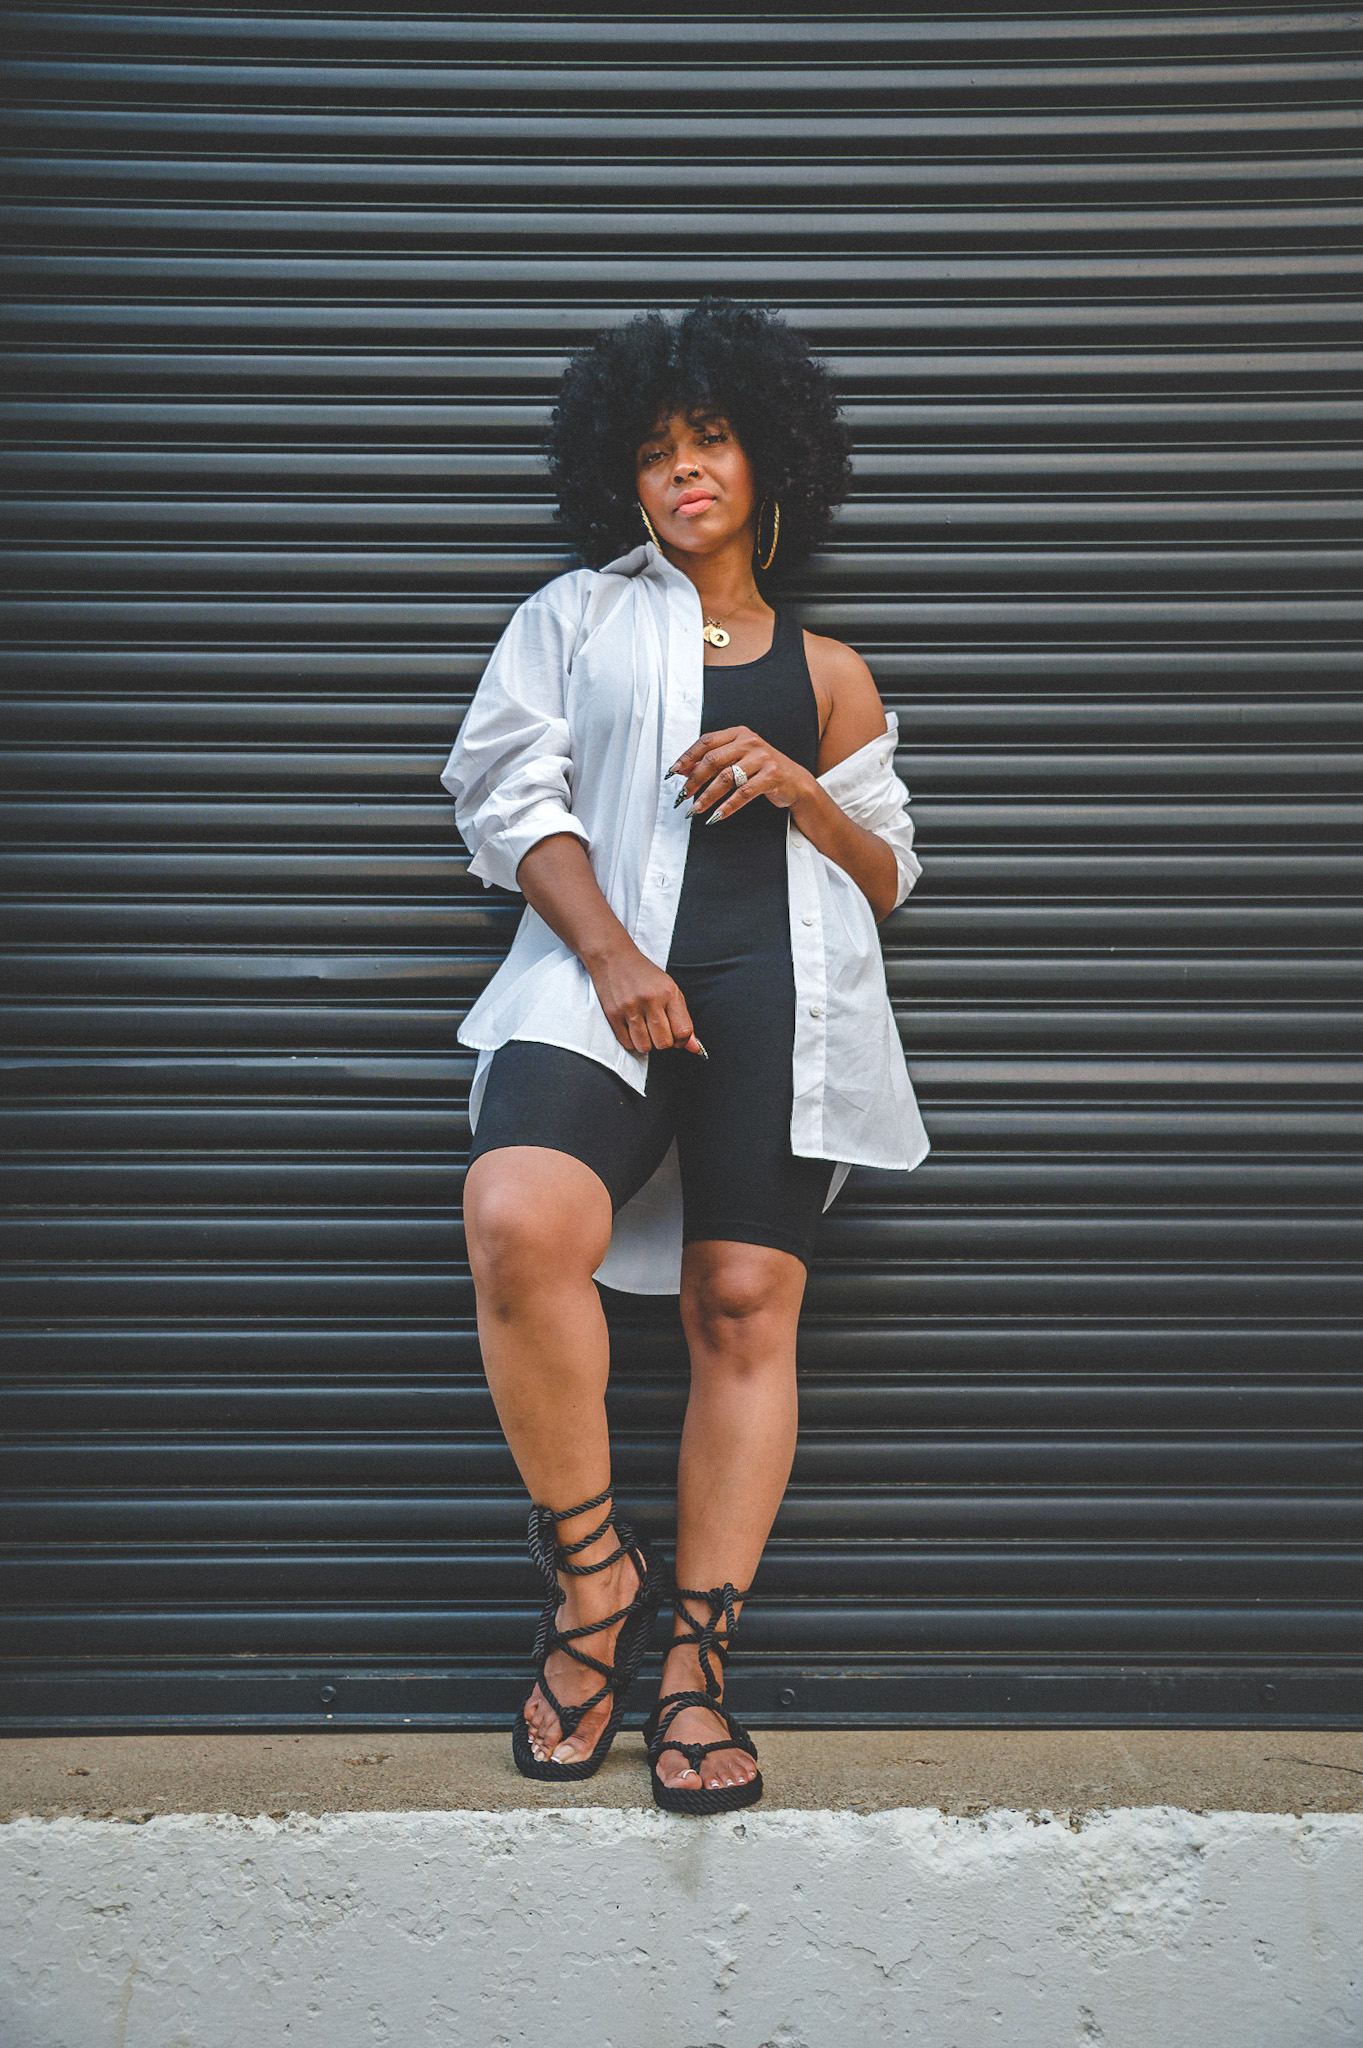 SWEENEE STYLE, BLACK BASICS, HOW TO WEAR BIKER SHORTS, HOW TO WEAR NATURAL HAIR, HOW TO WEAR A WHITE BUTTON DOWN TOP, NATURAL CURLS, INDIANAPOLIS FASHION BLOG, INDIANA FASHION BLOGGER, BLACK GIRLS WHO BLOG, BLACK GIRL FASHION BLOGGER